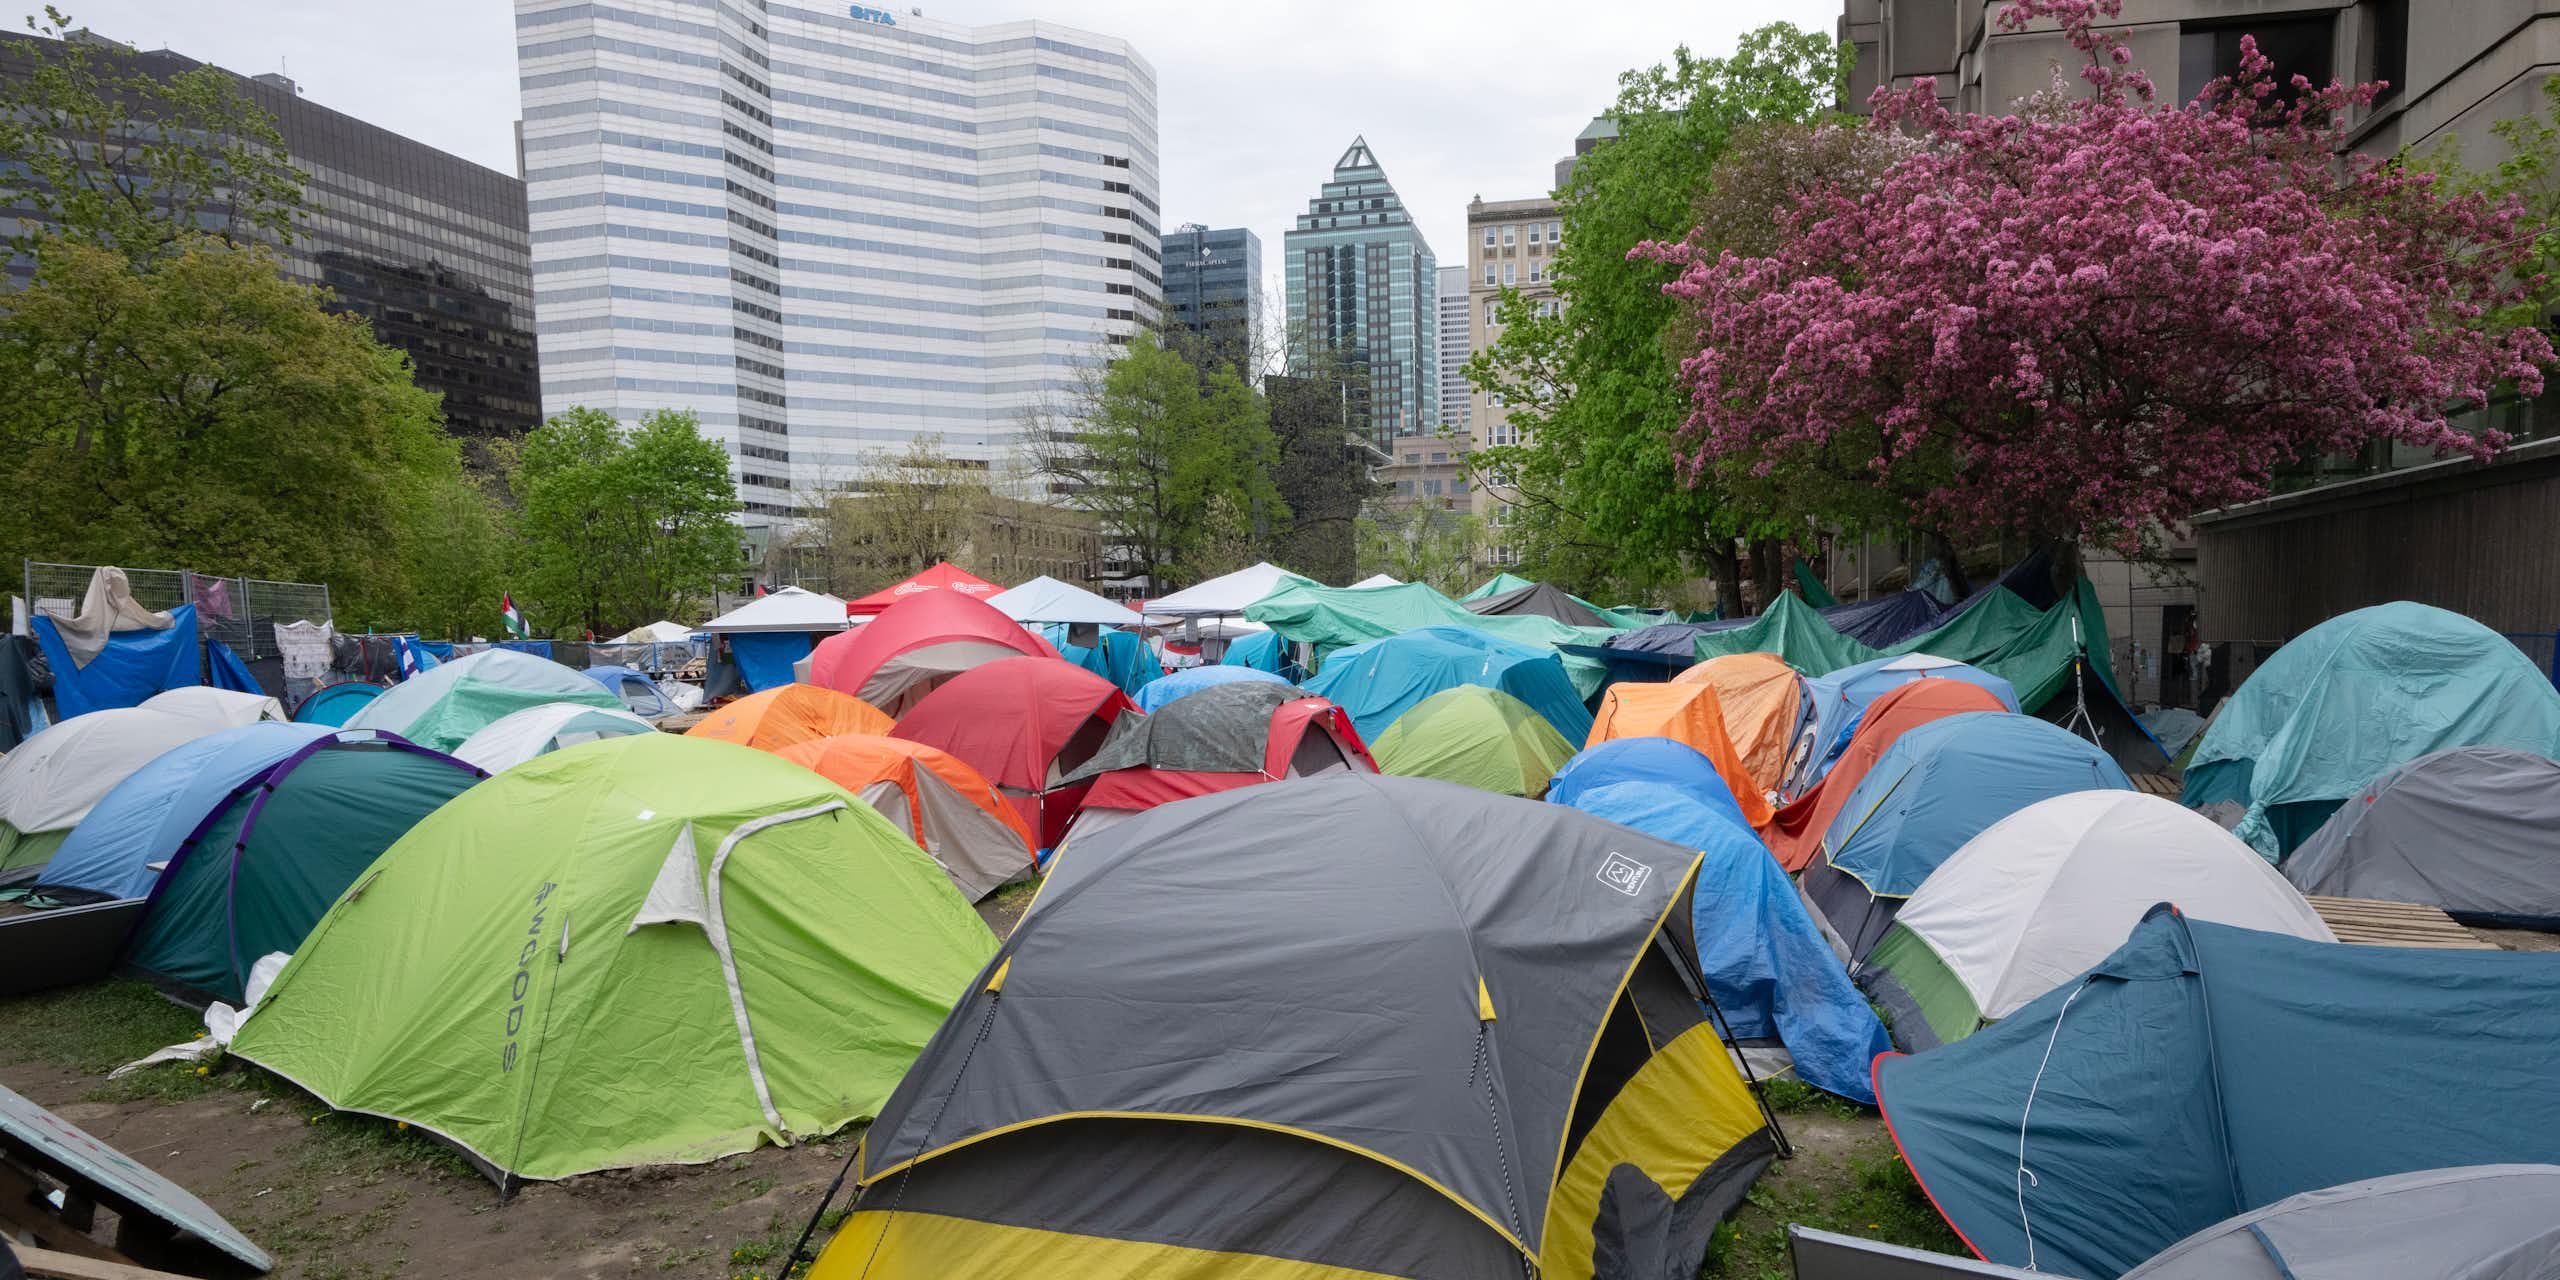 Dozens of colourful tents with city buildings and a flowering tree in the background. 